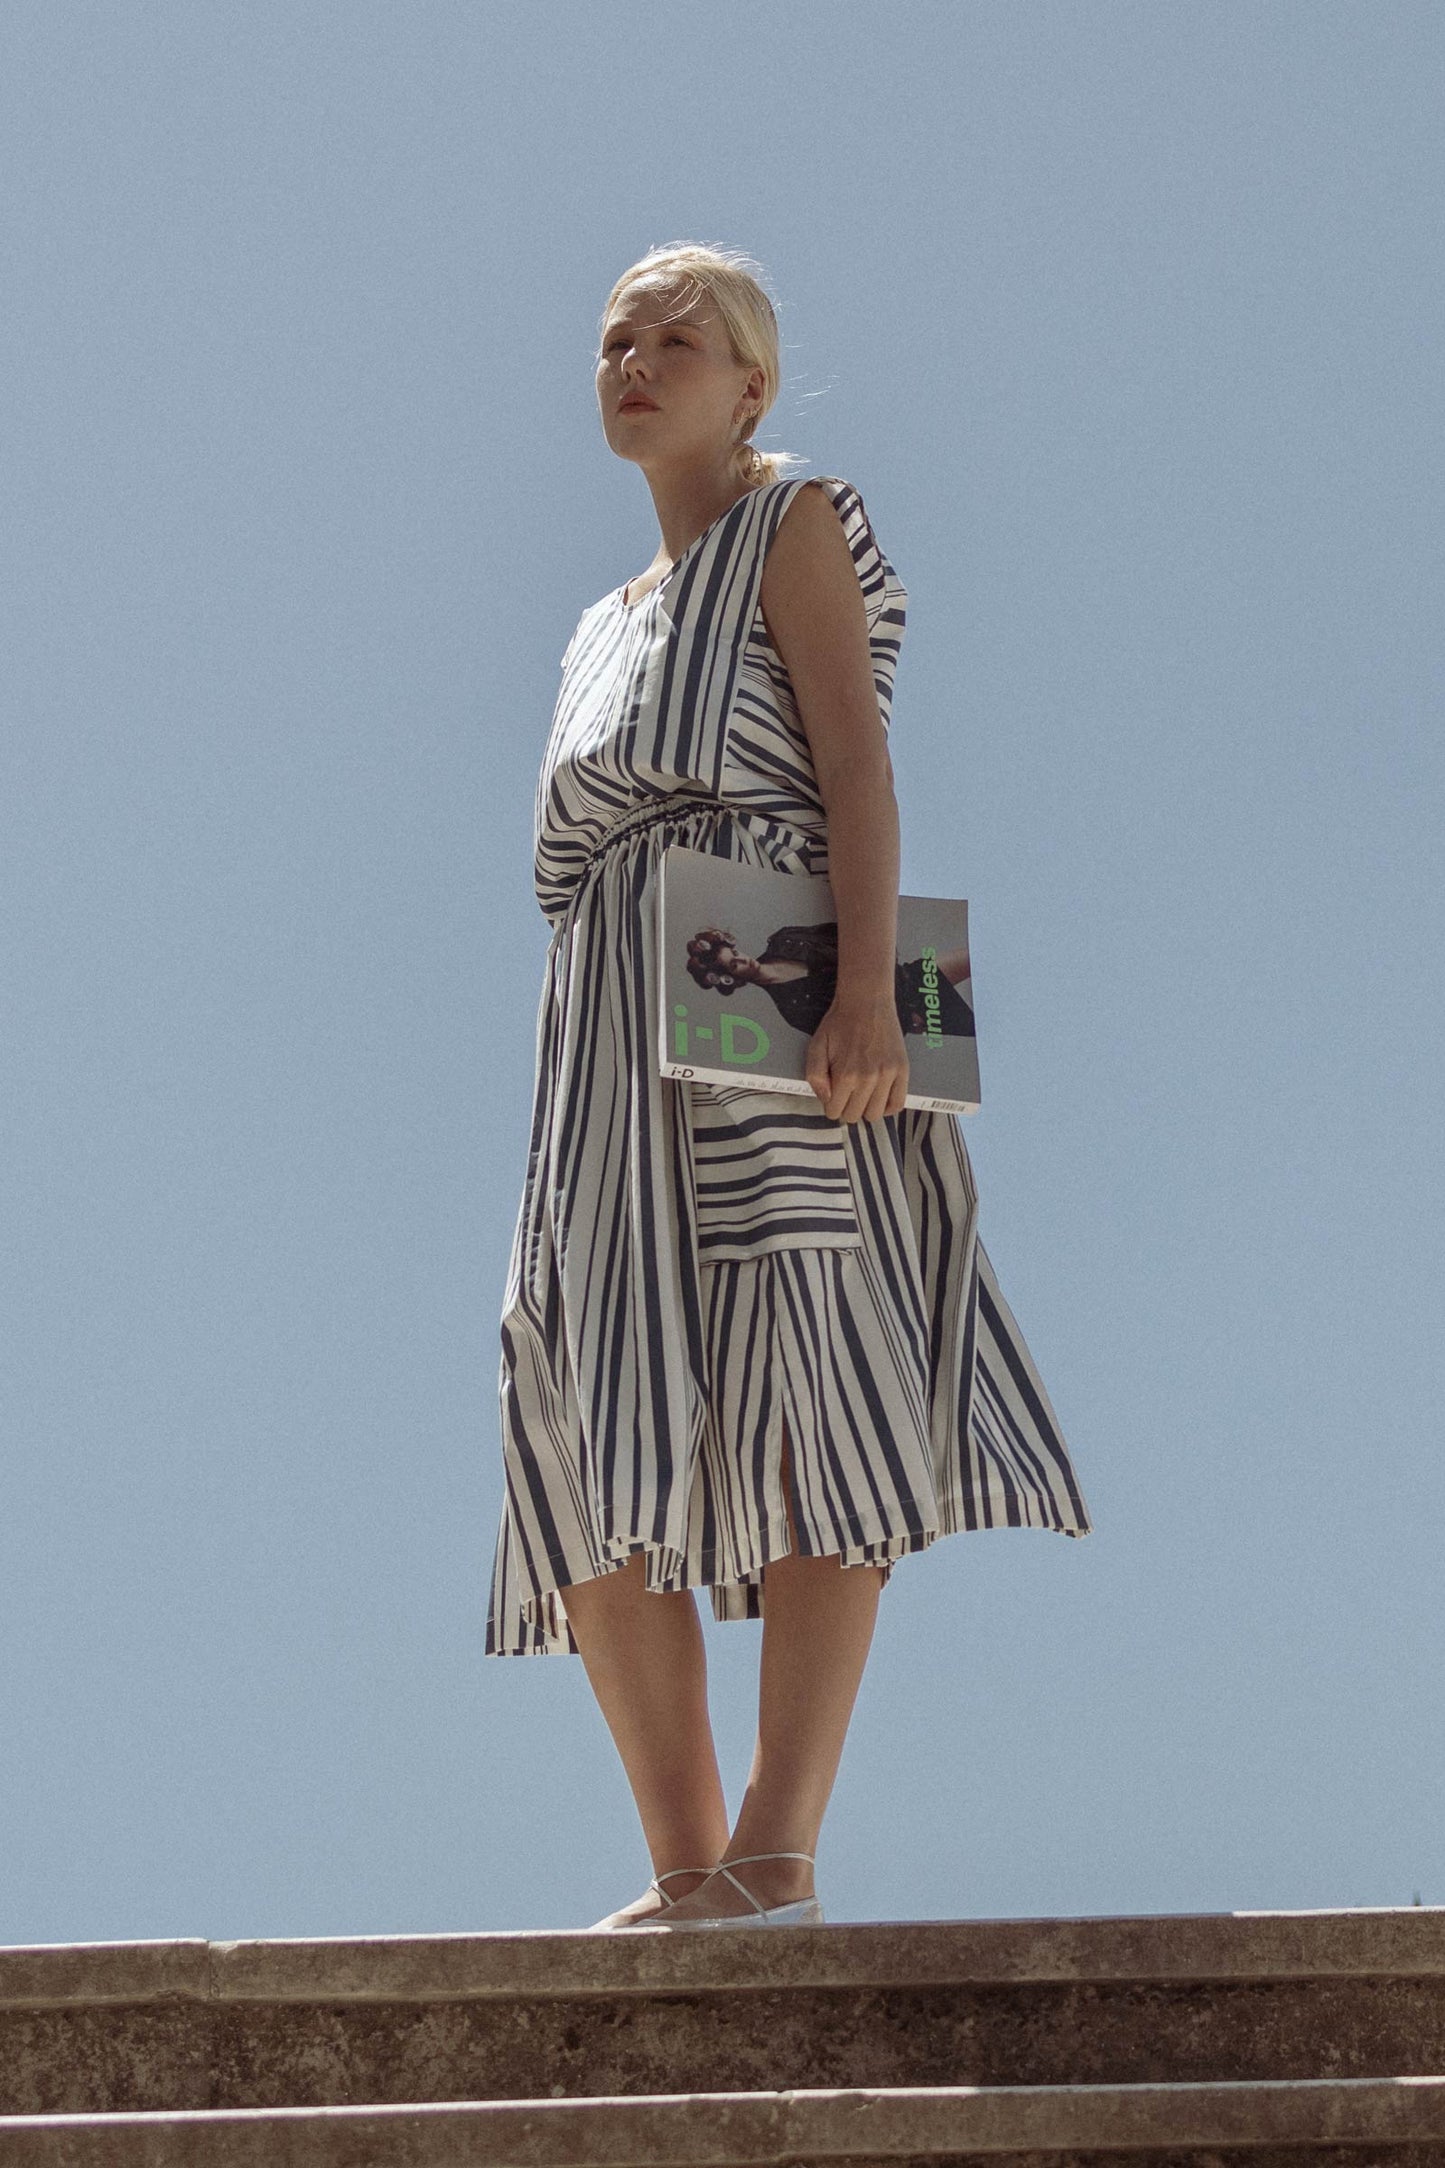 Model wearing 10 to 10  striped white and blue skirt and top